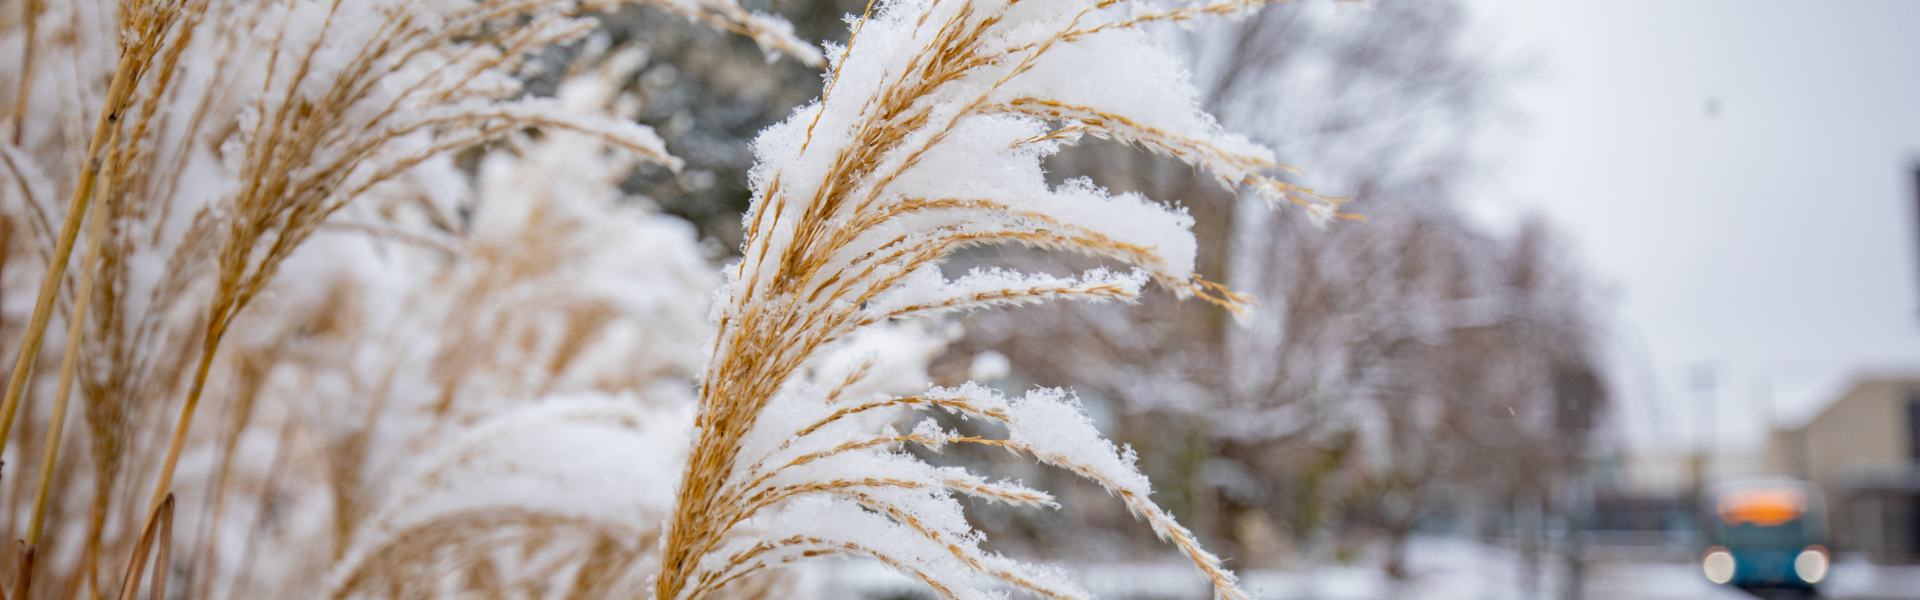 A closeup of tall grass covered in snow, blurry in the background is a Guelph Transit bus.